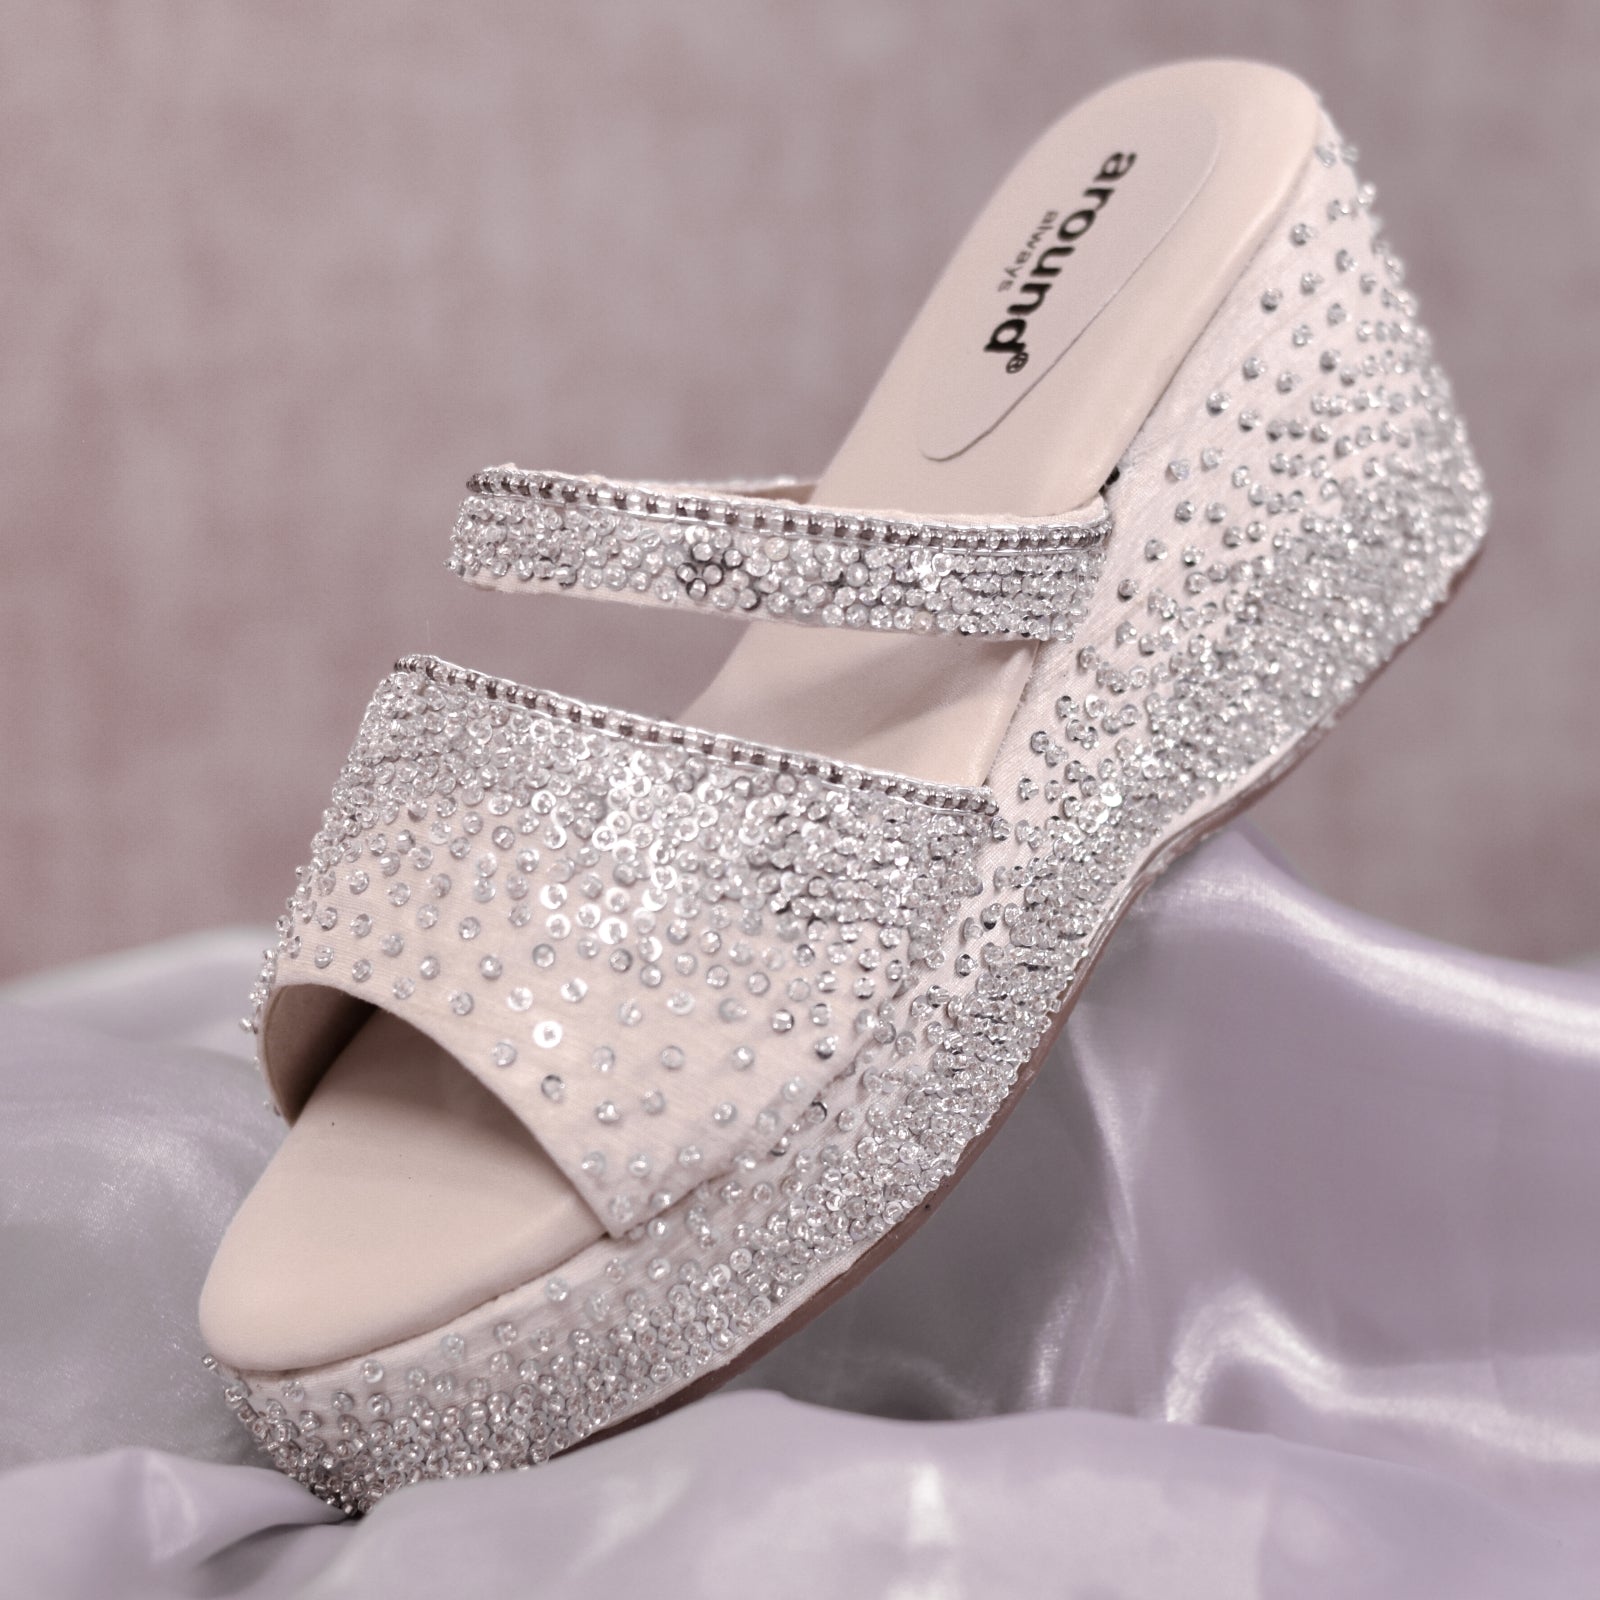 Embroidered heels for Christian weddings